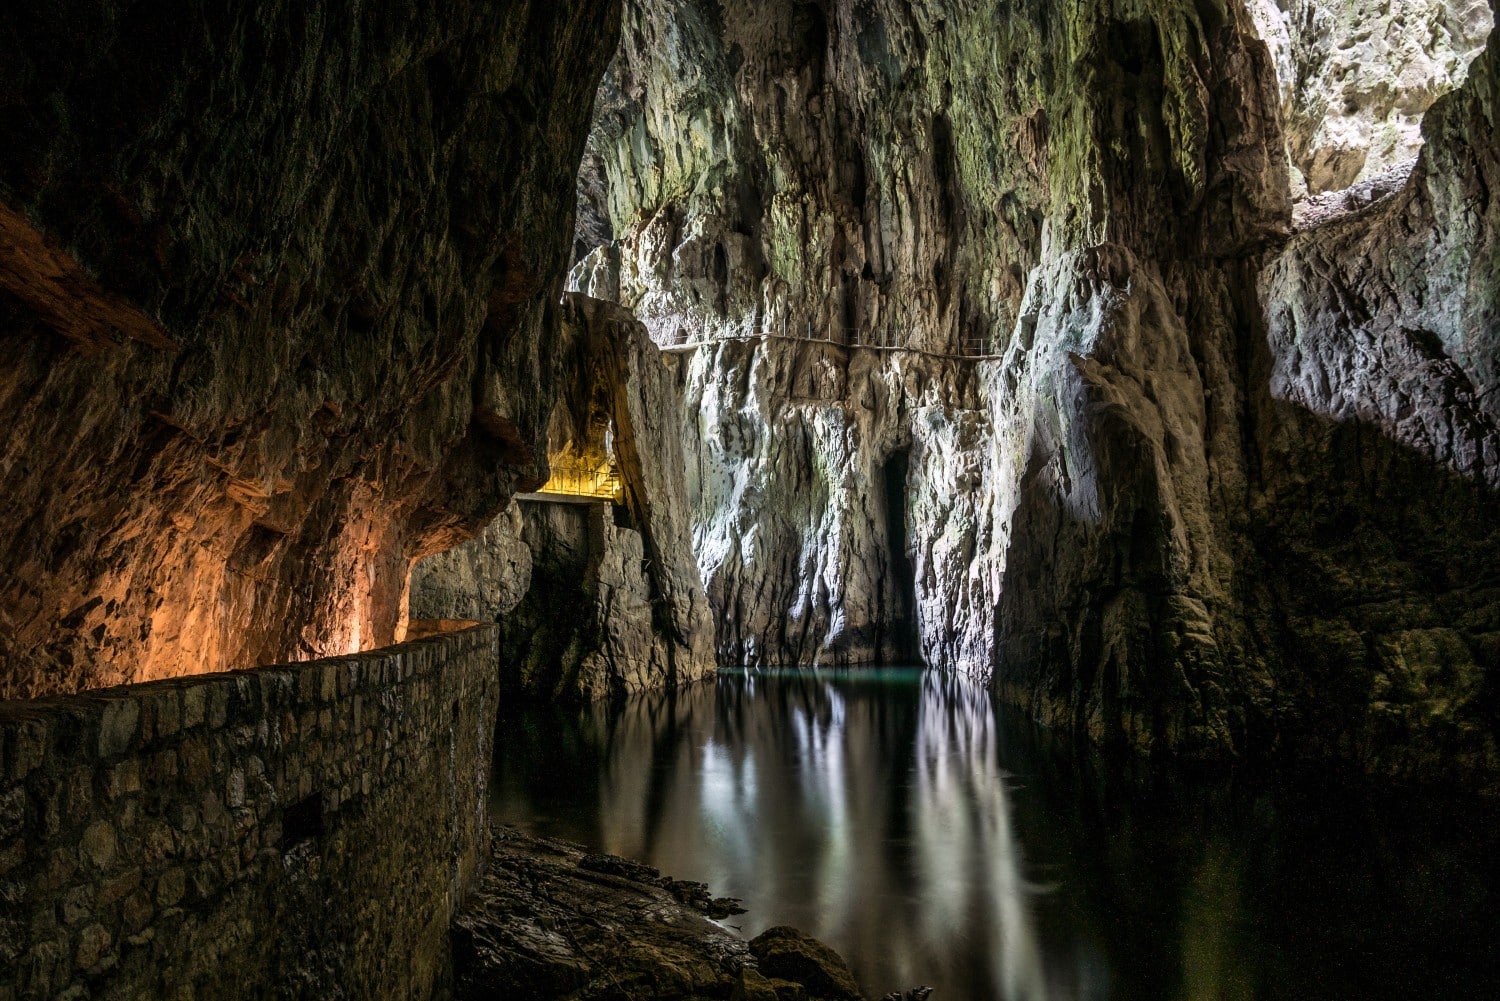 Skocjan Caves, Slovenia are a real highlight when hiking in the alps